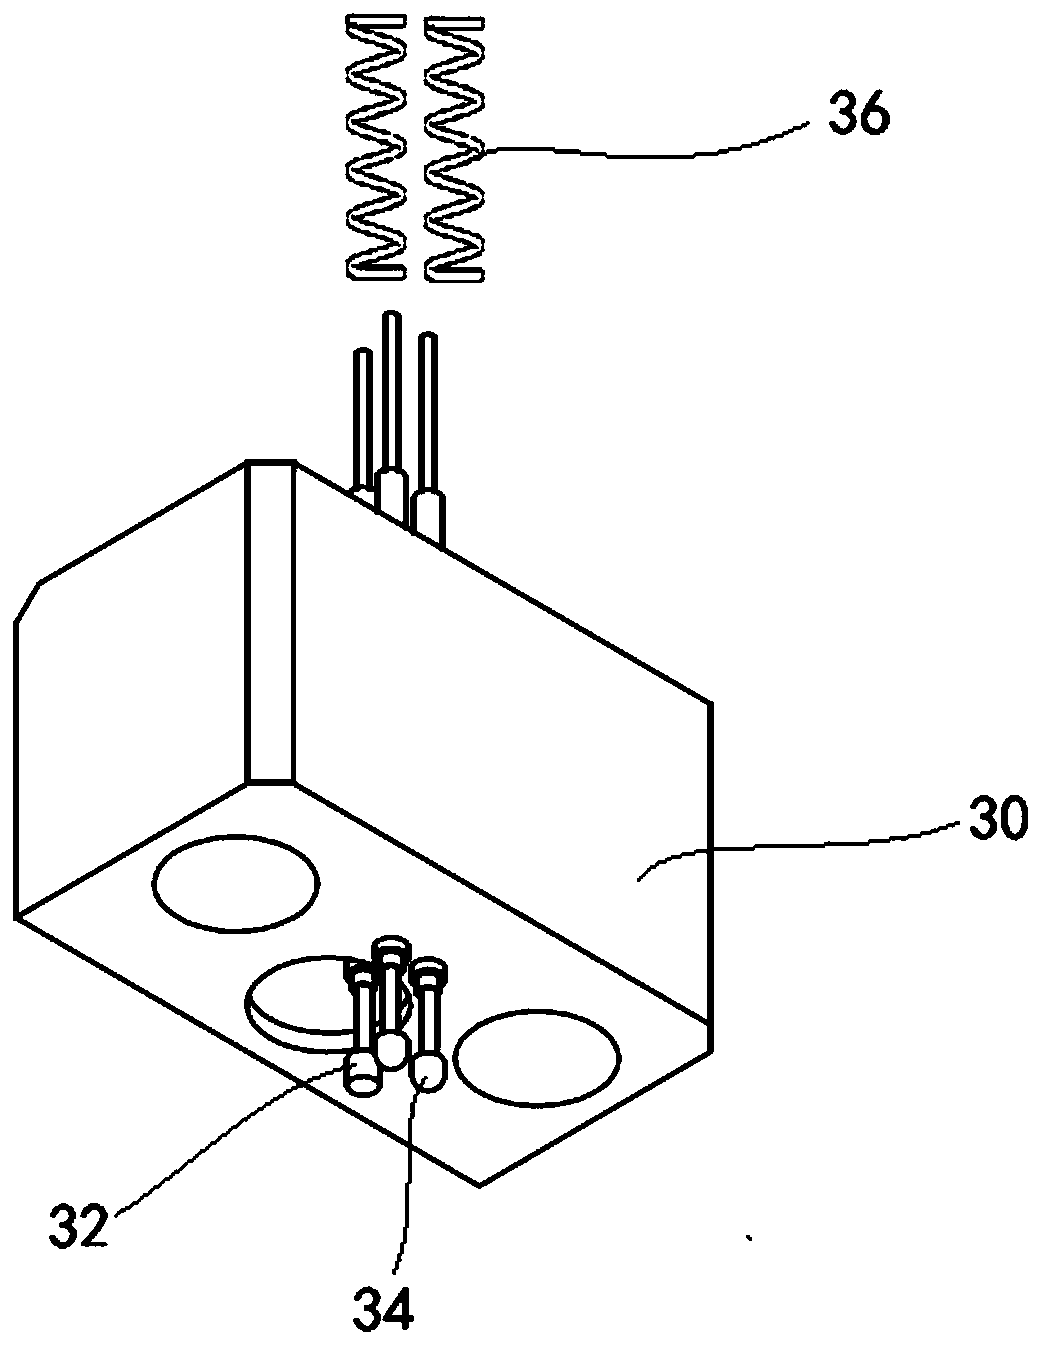 A receiver acoustic testing device and acoustic testing system